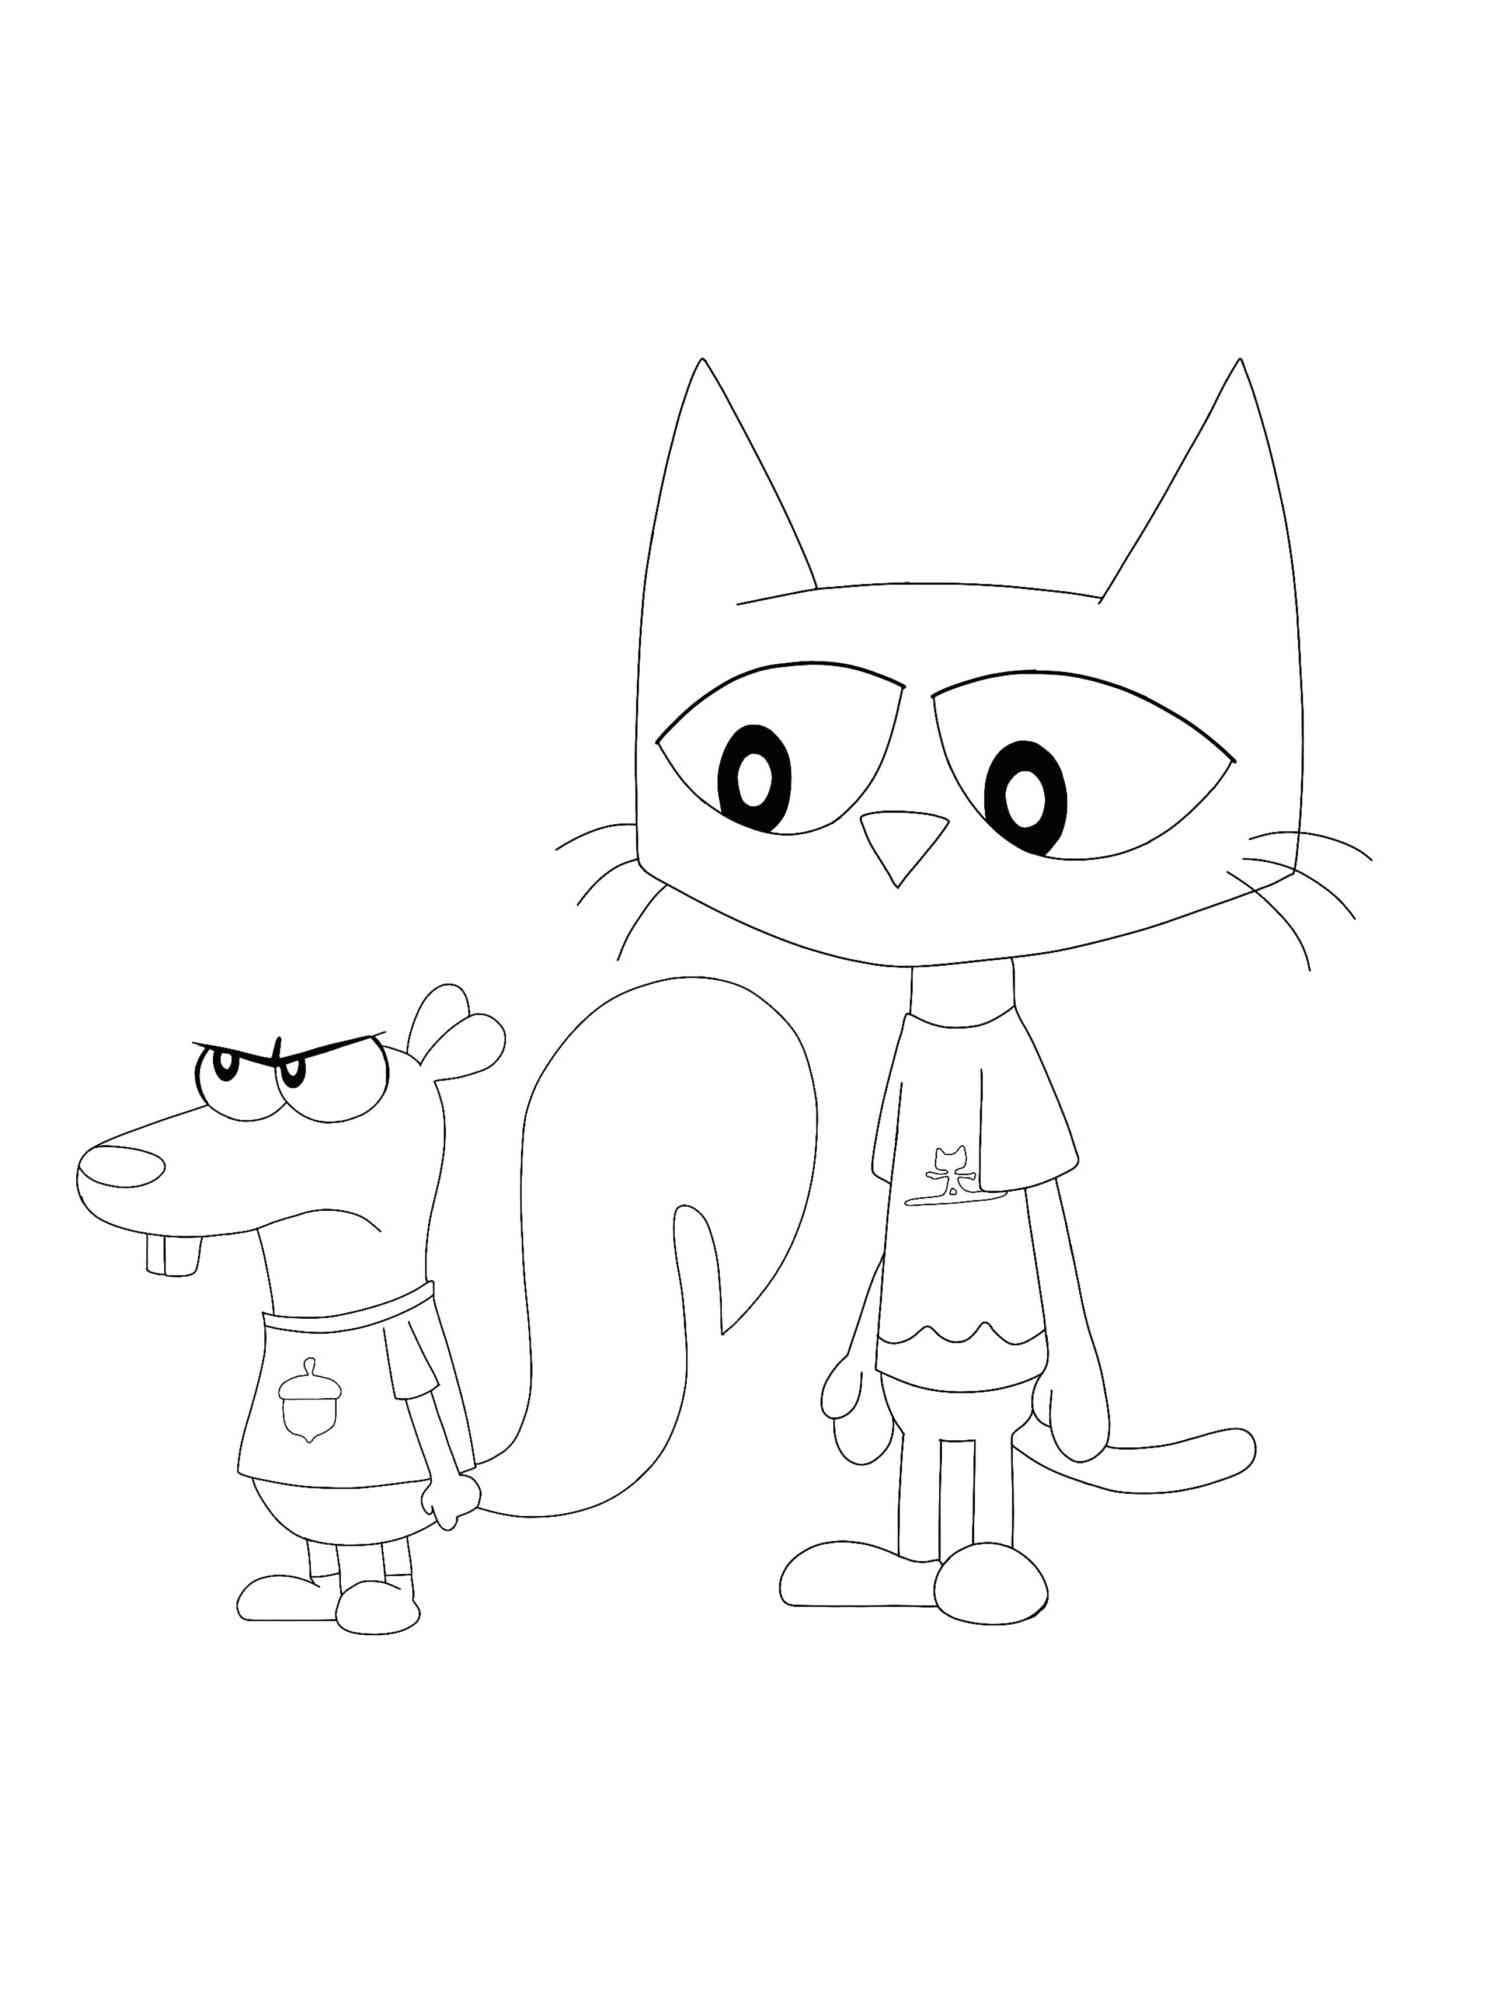 Pete the cat coloring pages